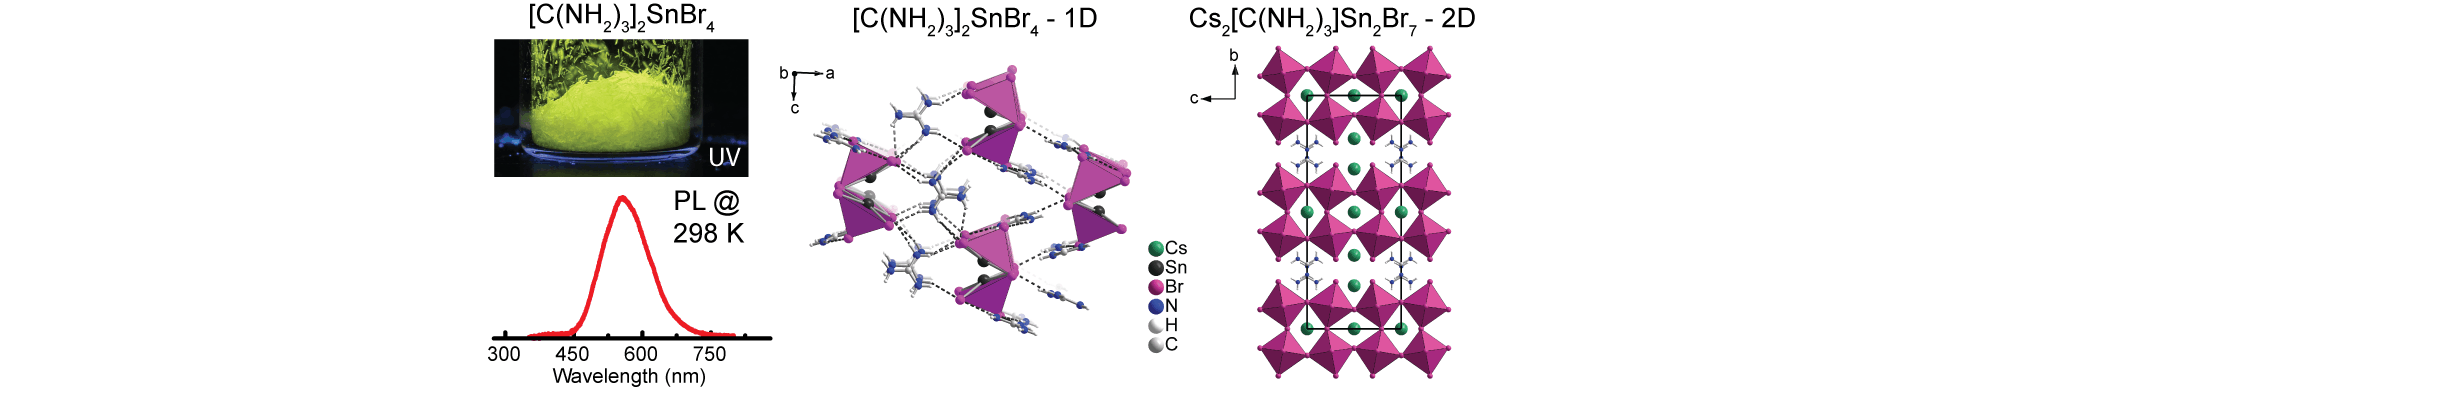 Guanidinium and mixed Cesium-Guanidinium Tin(II) Bromides: Effects of Quantum Confinement and Out-of-Plane Octahedral Tilting